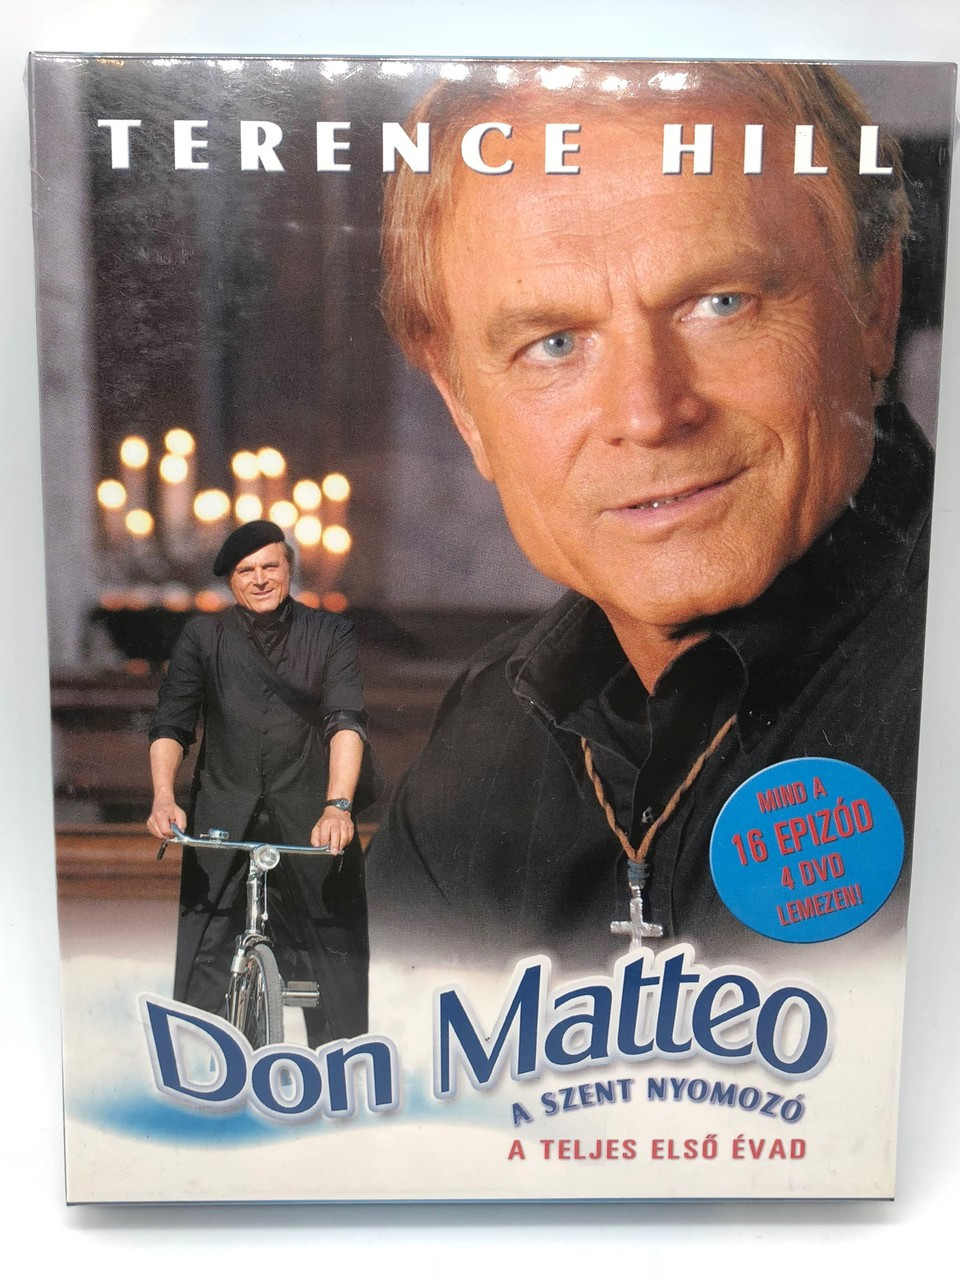 Terence Hill as Don Matteo 2000 / SEASON ONE - 16 Episodes 4 DVD Hungarian  Release / Don Matteo - A Szent Nyomozo / A teljes elso evad / Region 2 PAL